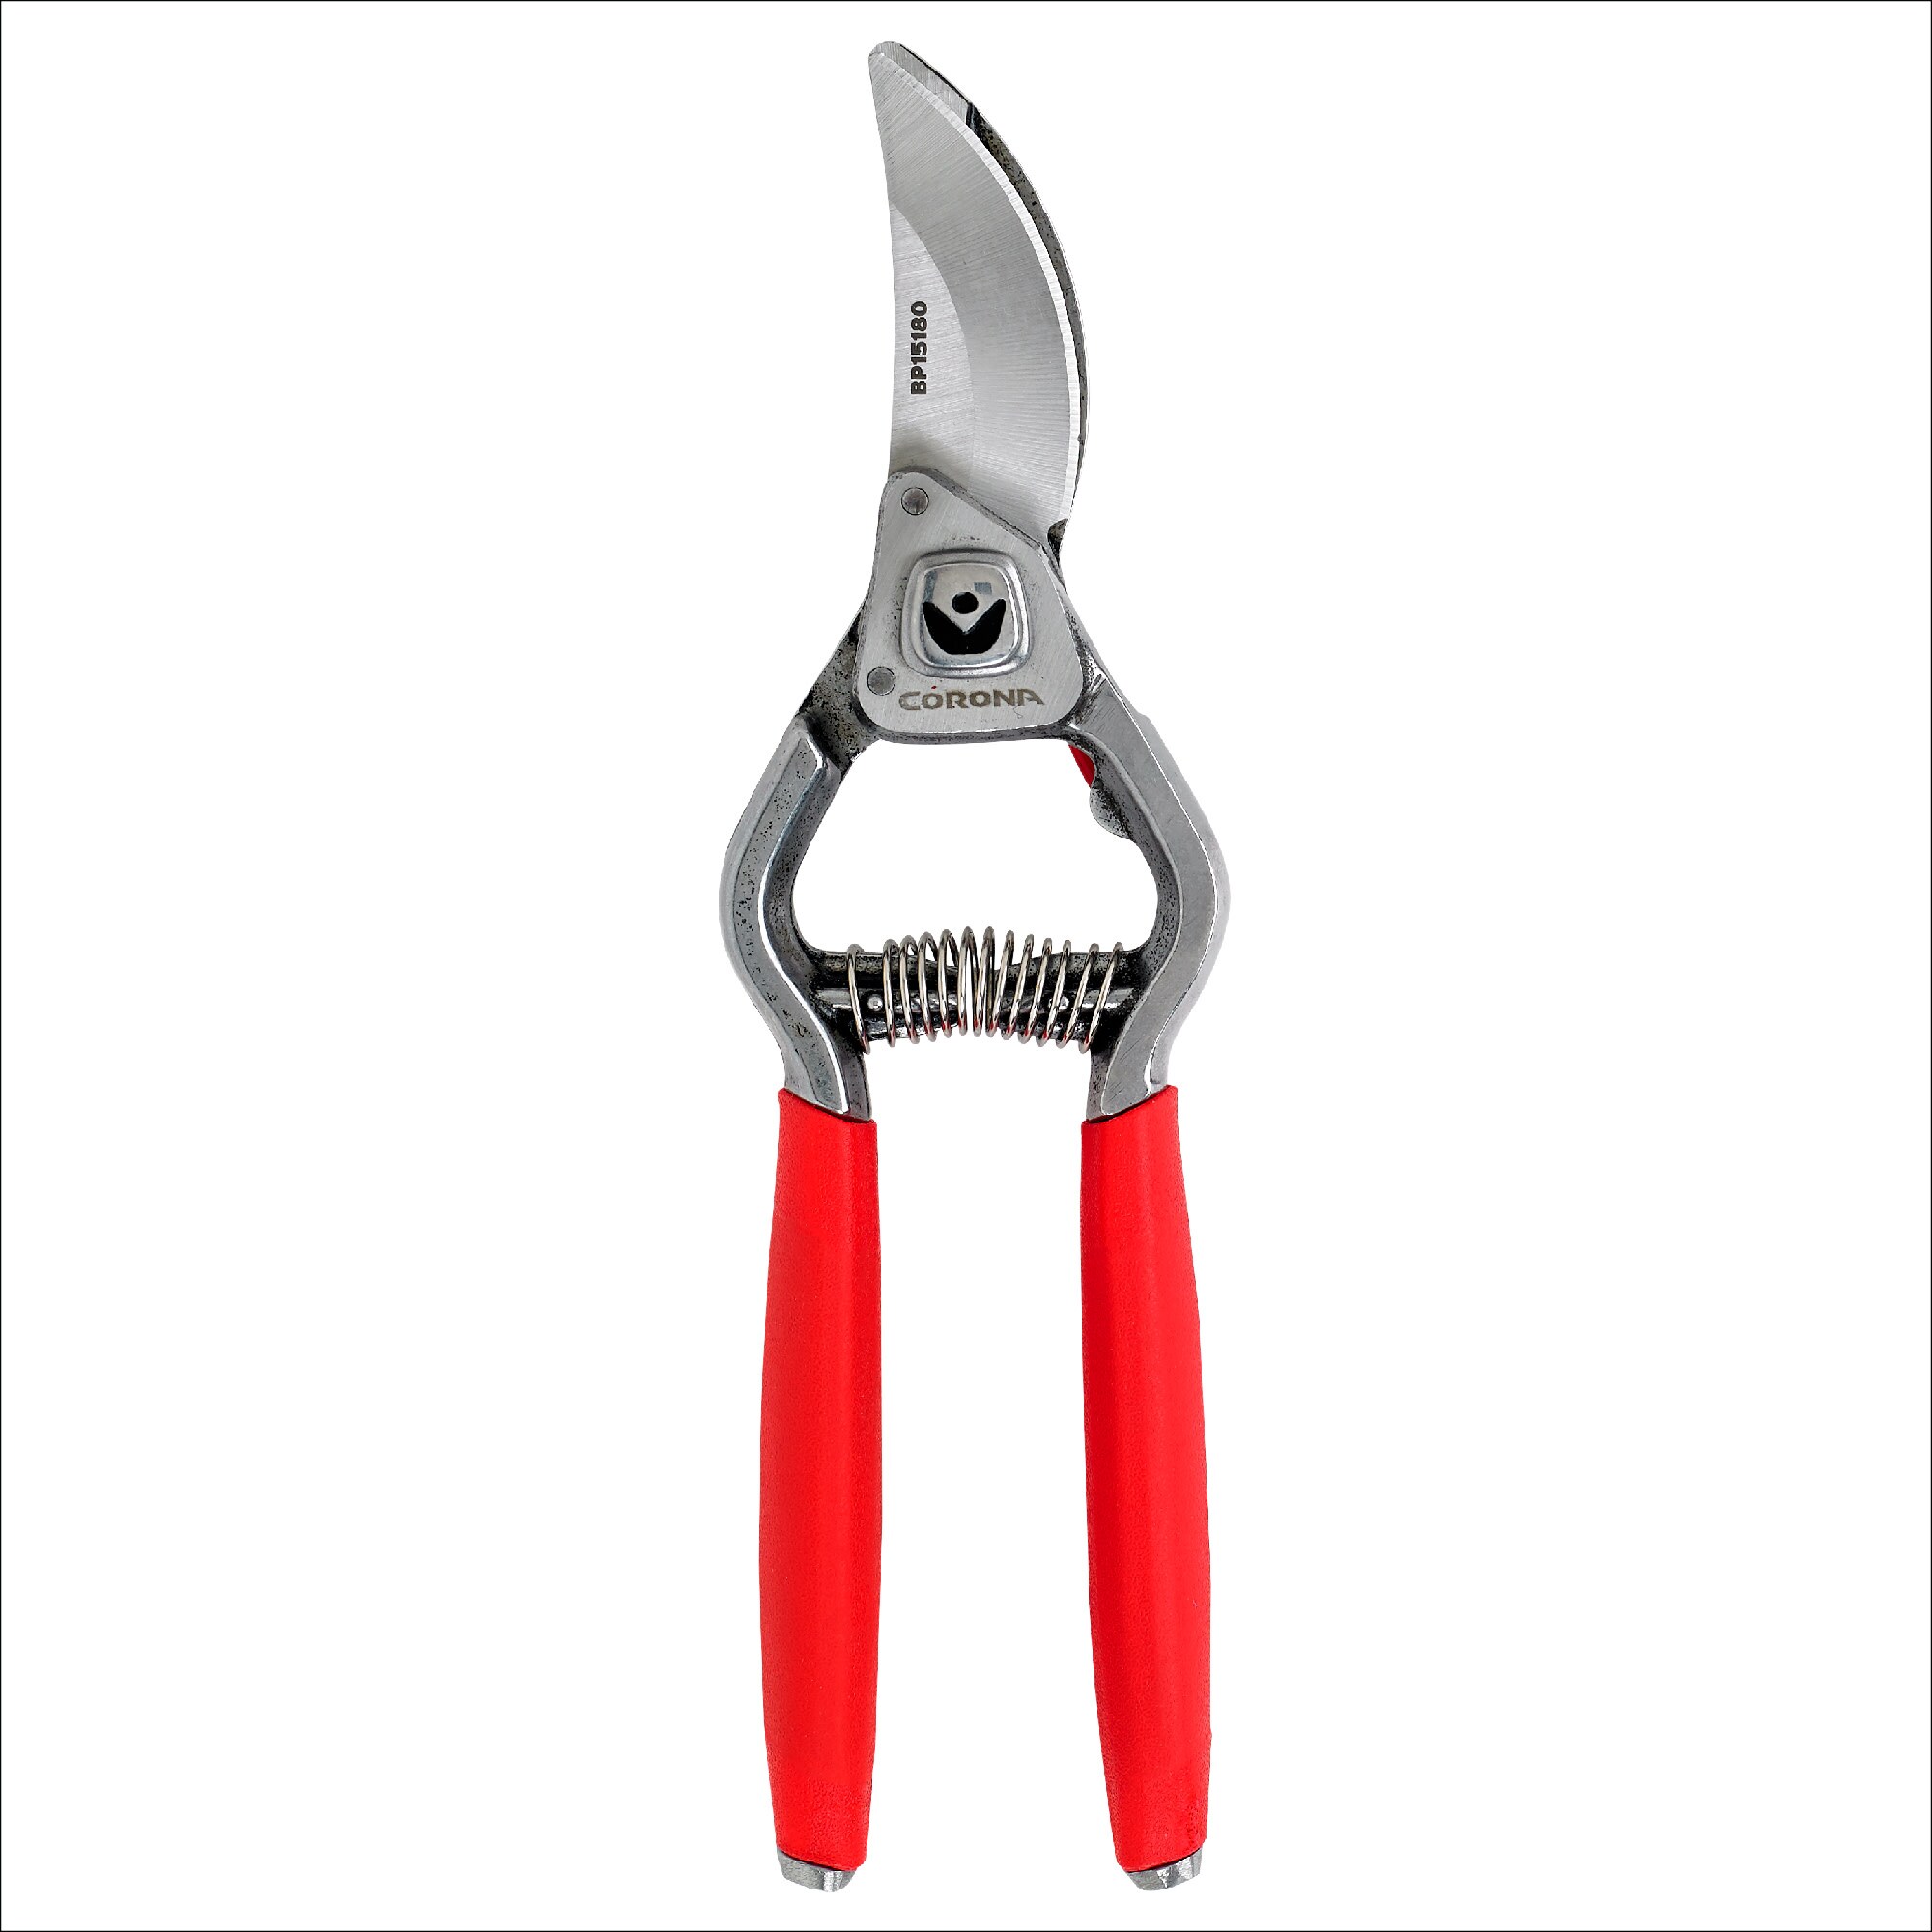 1-Inch Red Corona BP15180 Forged Steel ClassicCUT Bypass Hand Pruner-1 Inch Cut Capacity Stem and Branch Garden Shears 